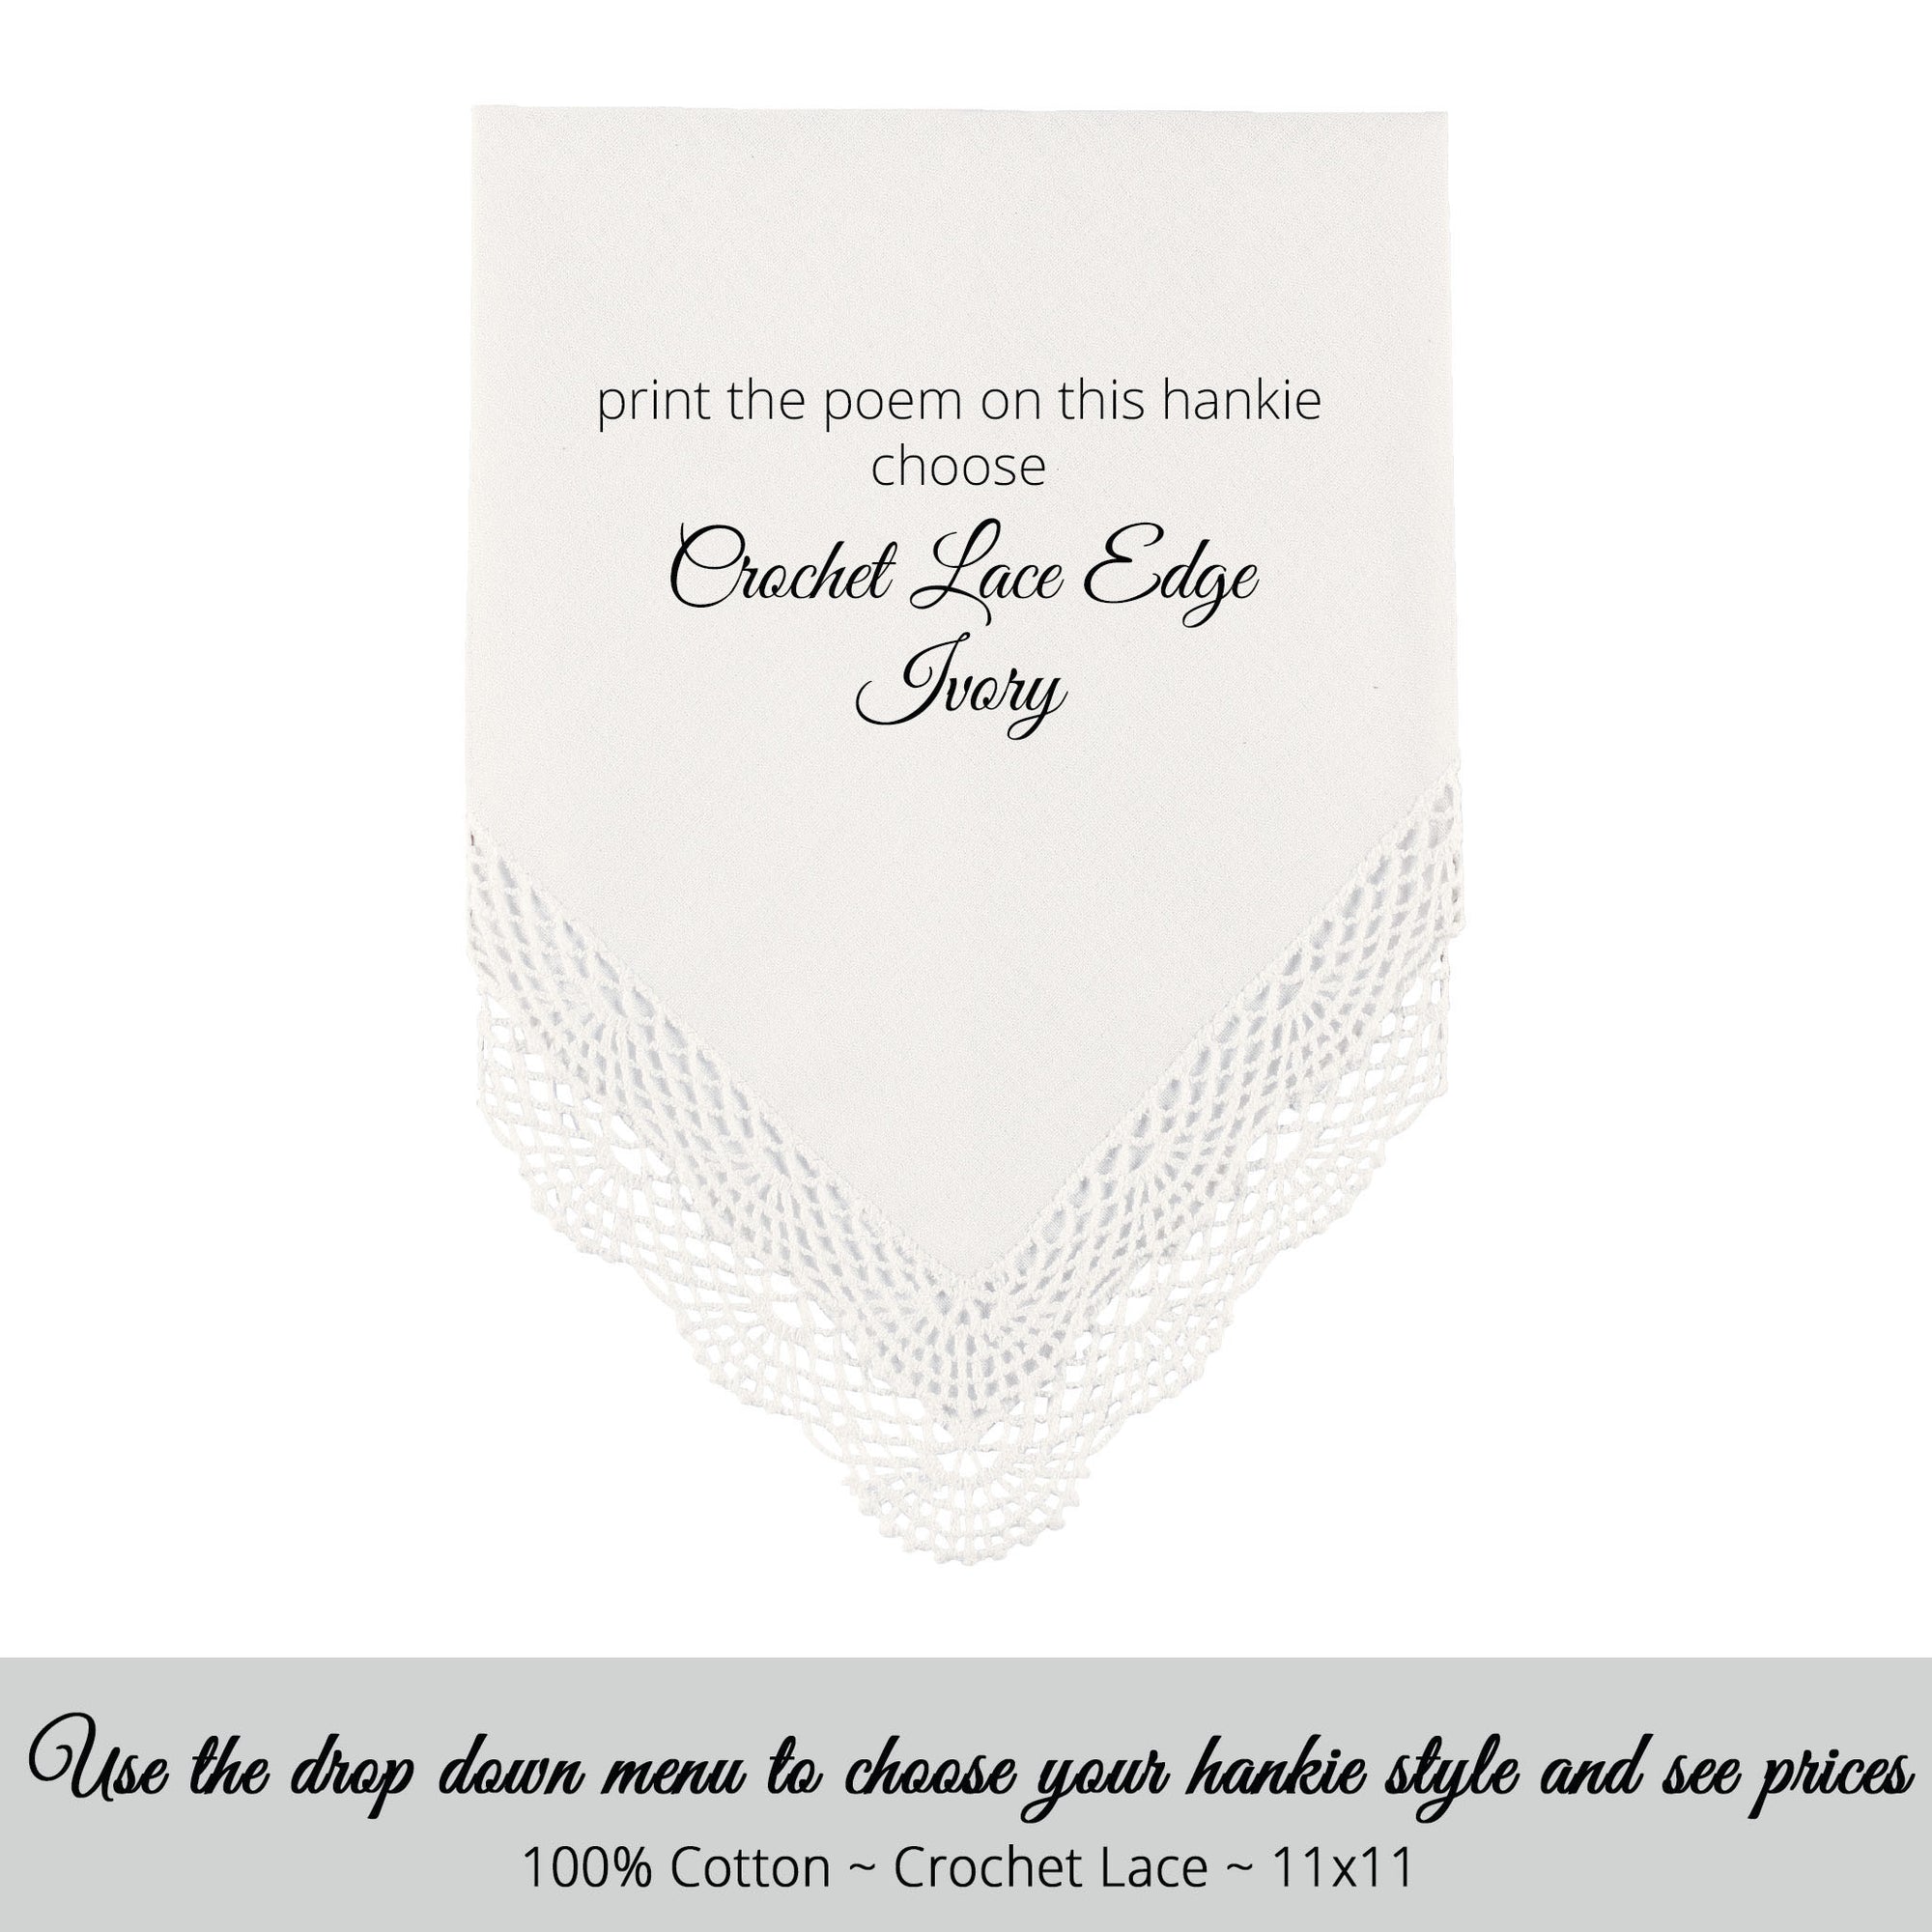 Wedding handkerchief Ivory with crochet lace edge for personalized printed hankie